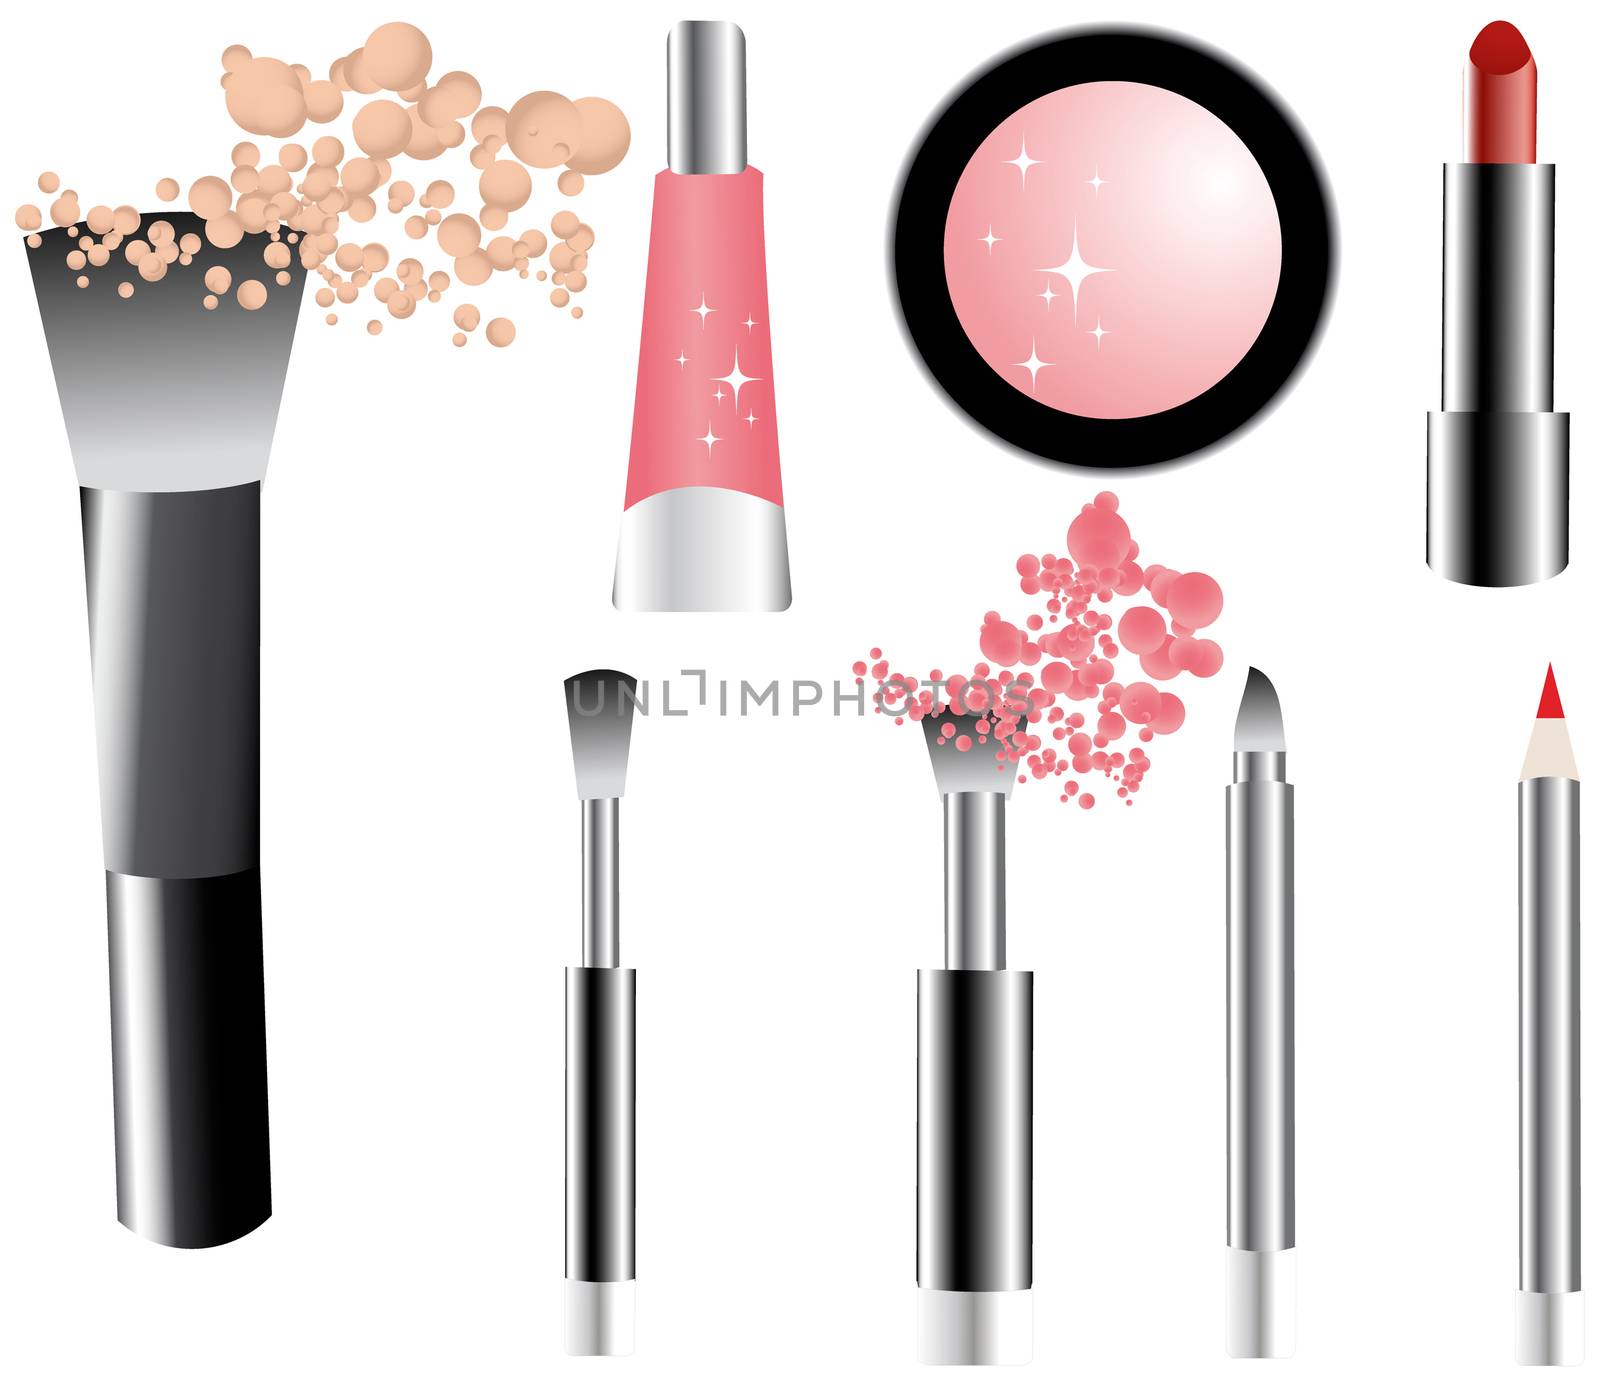 Vector make-up icons set- brushes, pencil, lipstick, gloss, shadow, powder.Makeup Trends - One of series mak-up rules illustrations